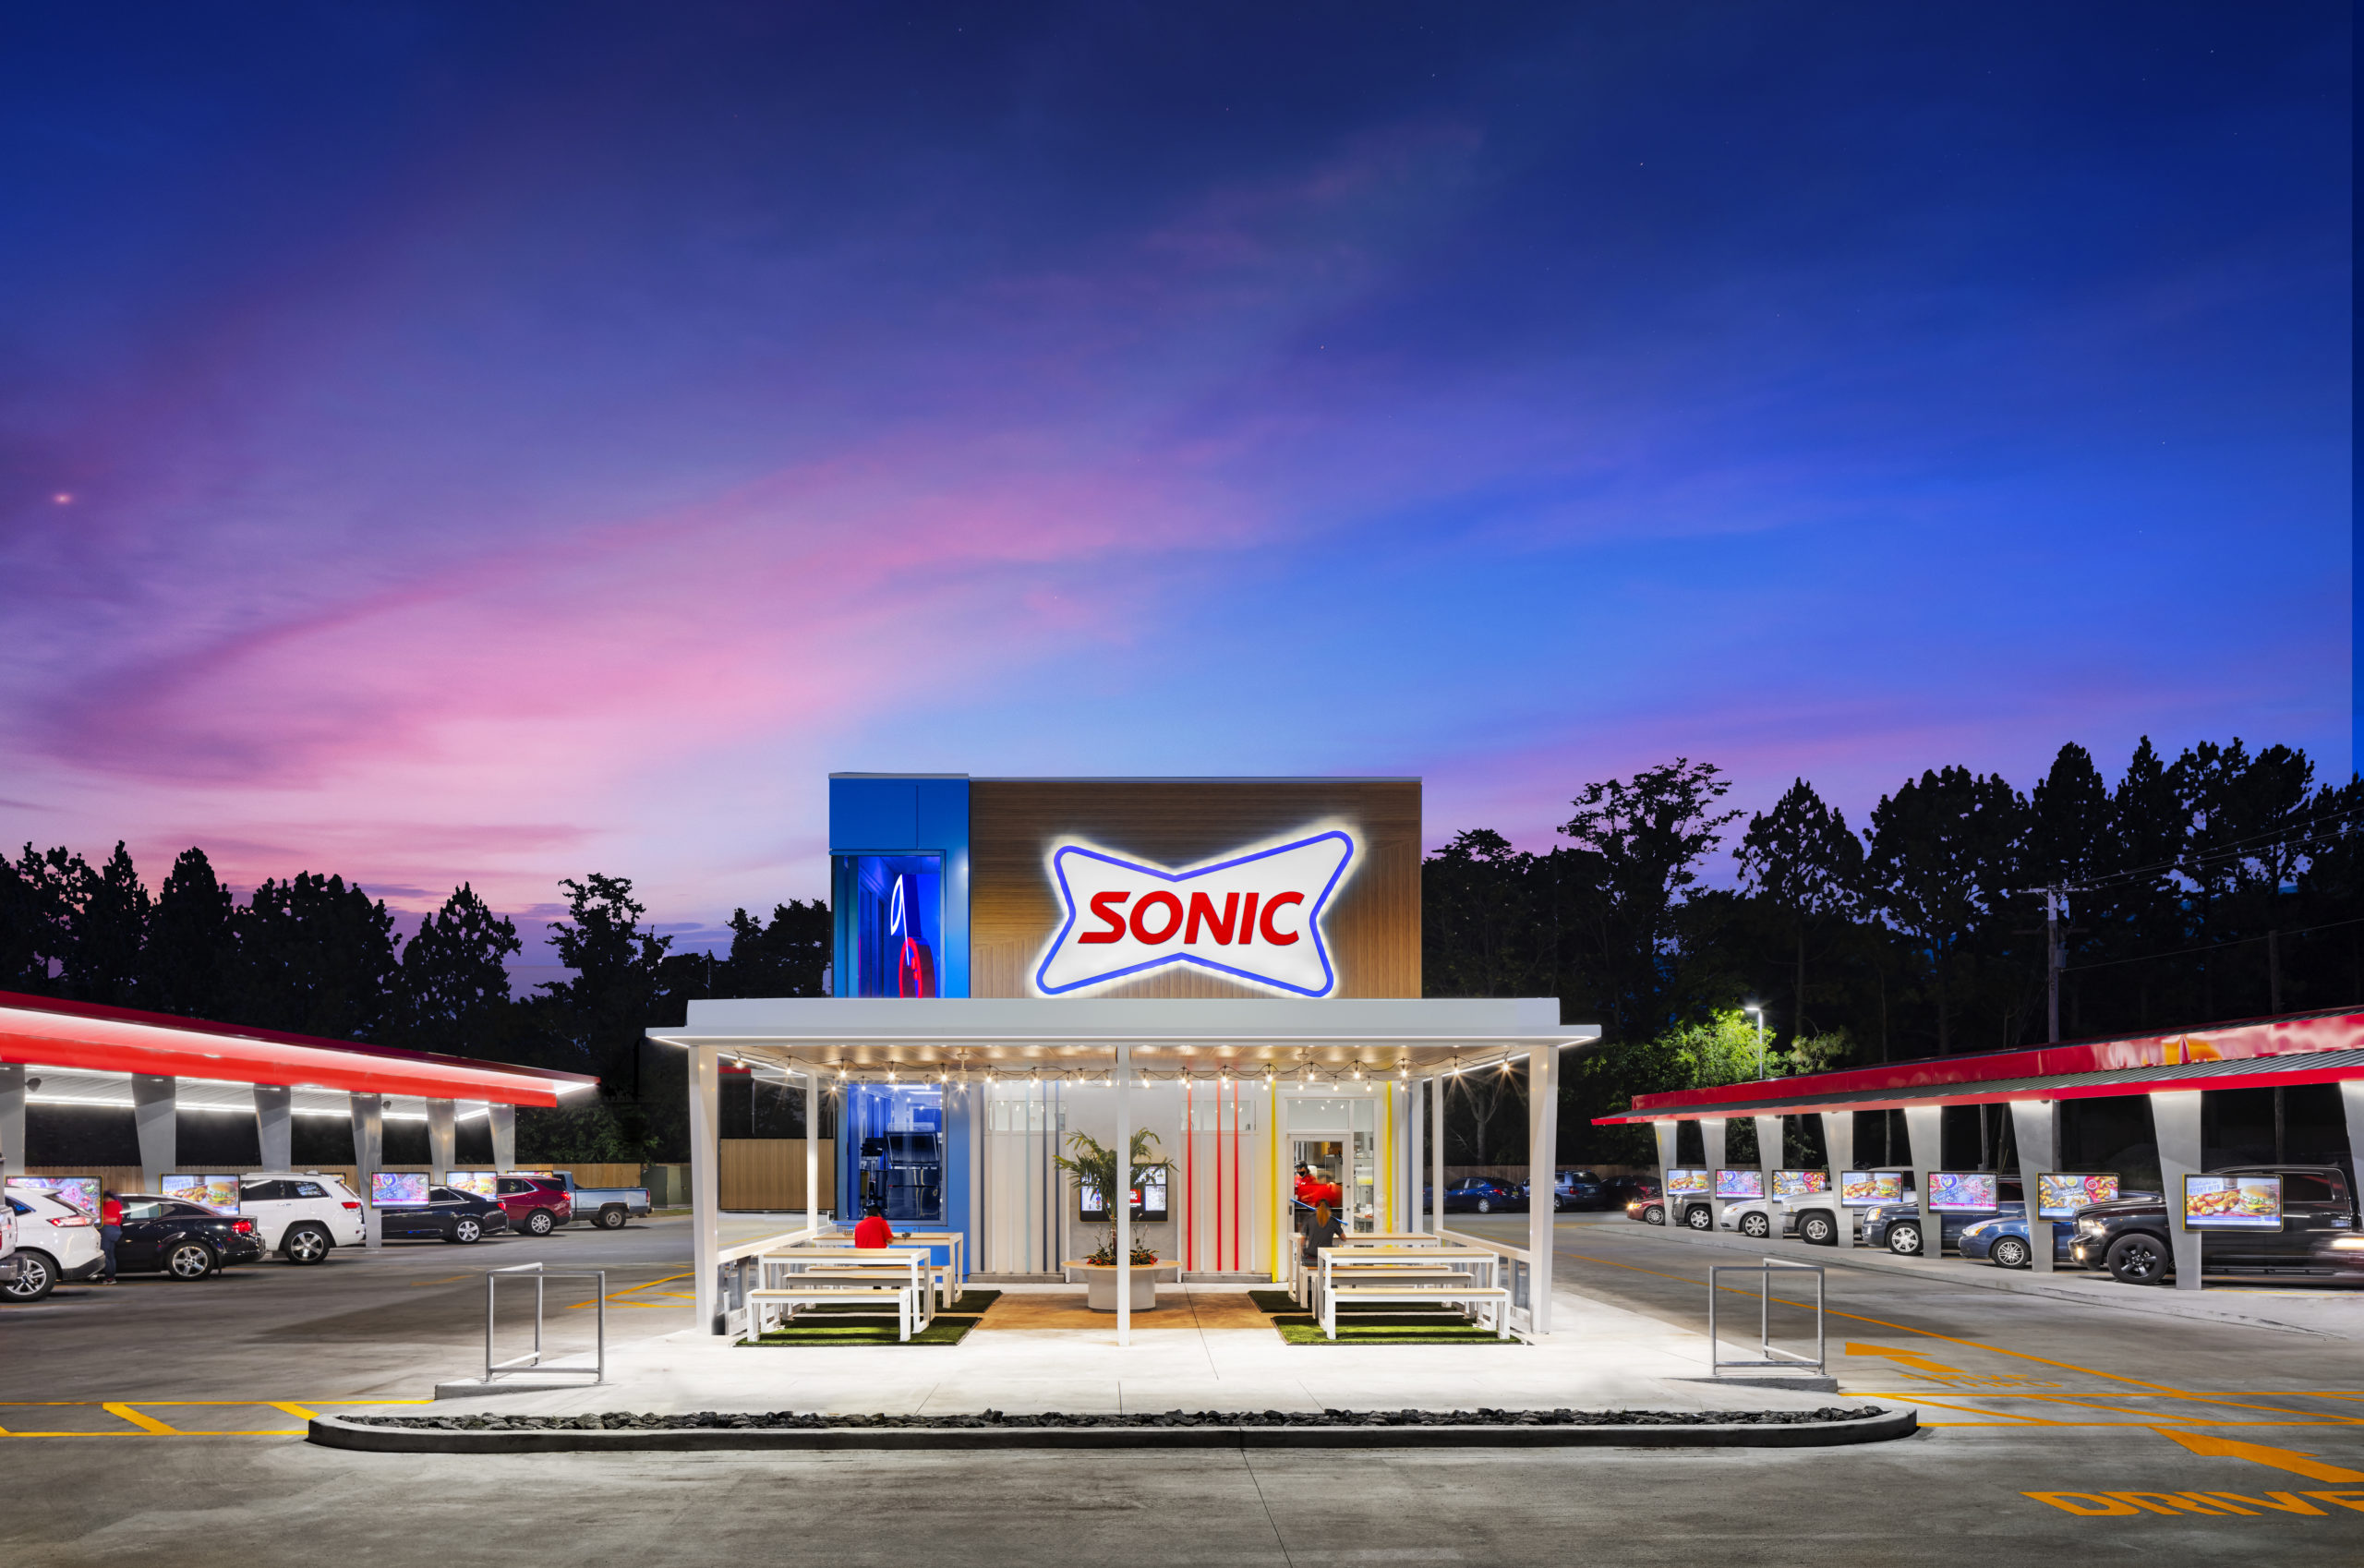 Take advantage of the limited-time incentives and invest in Sonic Drive-in Franchise to own a brand driving the quick service restaurant industry forward.